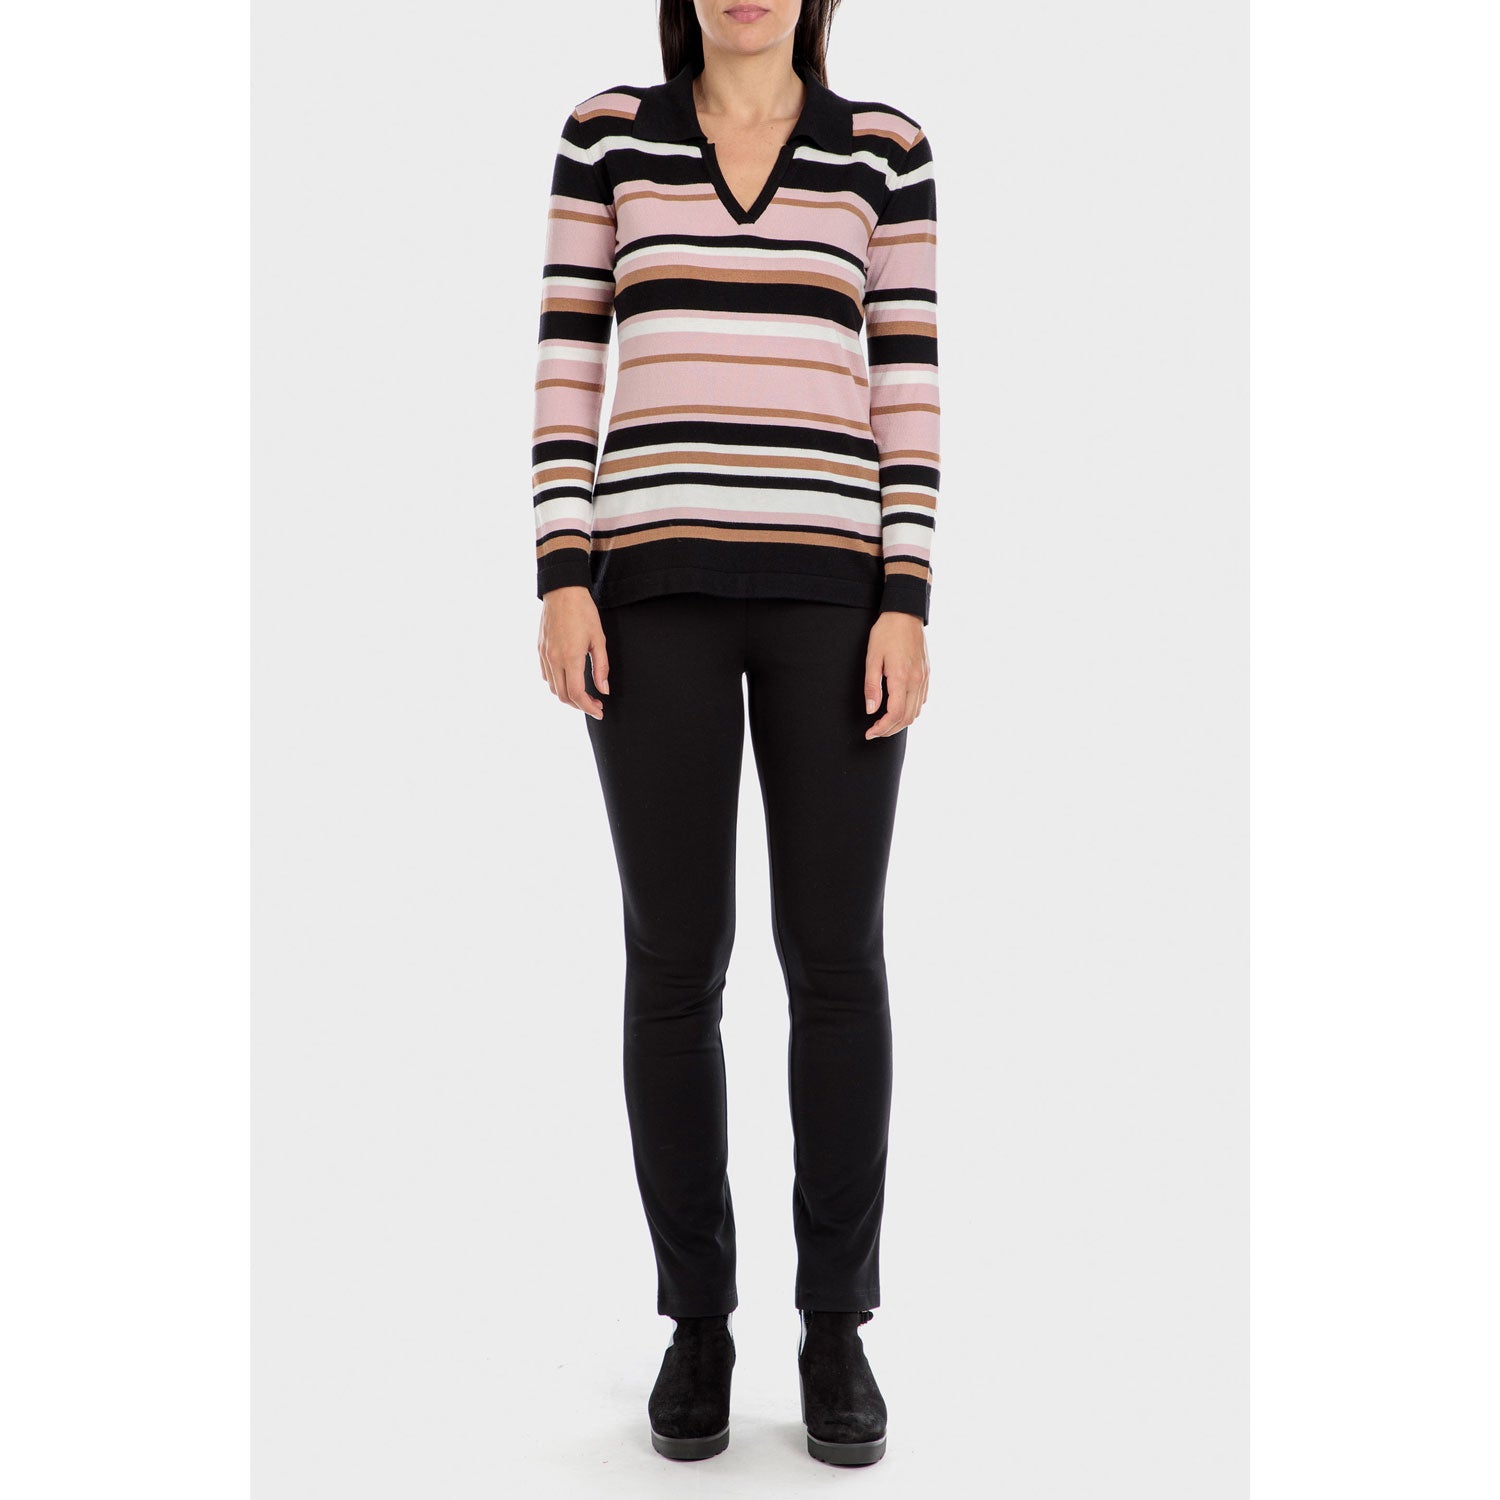 Punt Roma Multi-Coloured Striped Sweater - Black 3 Shaws Department Stores